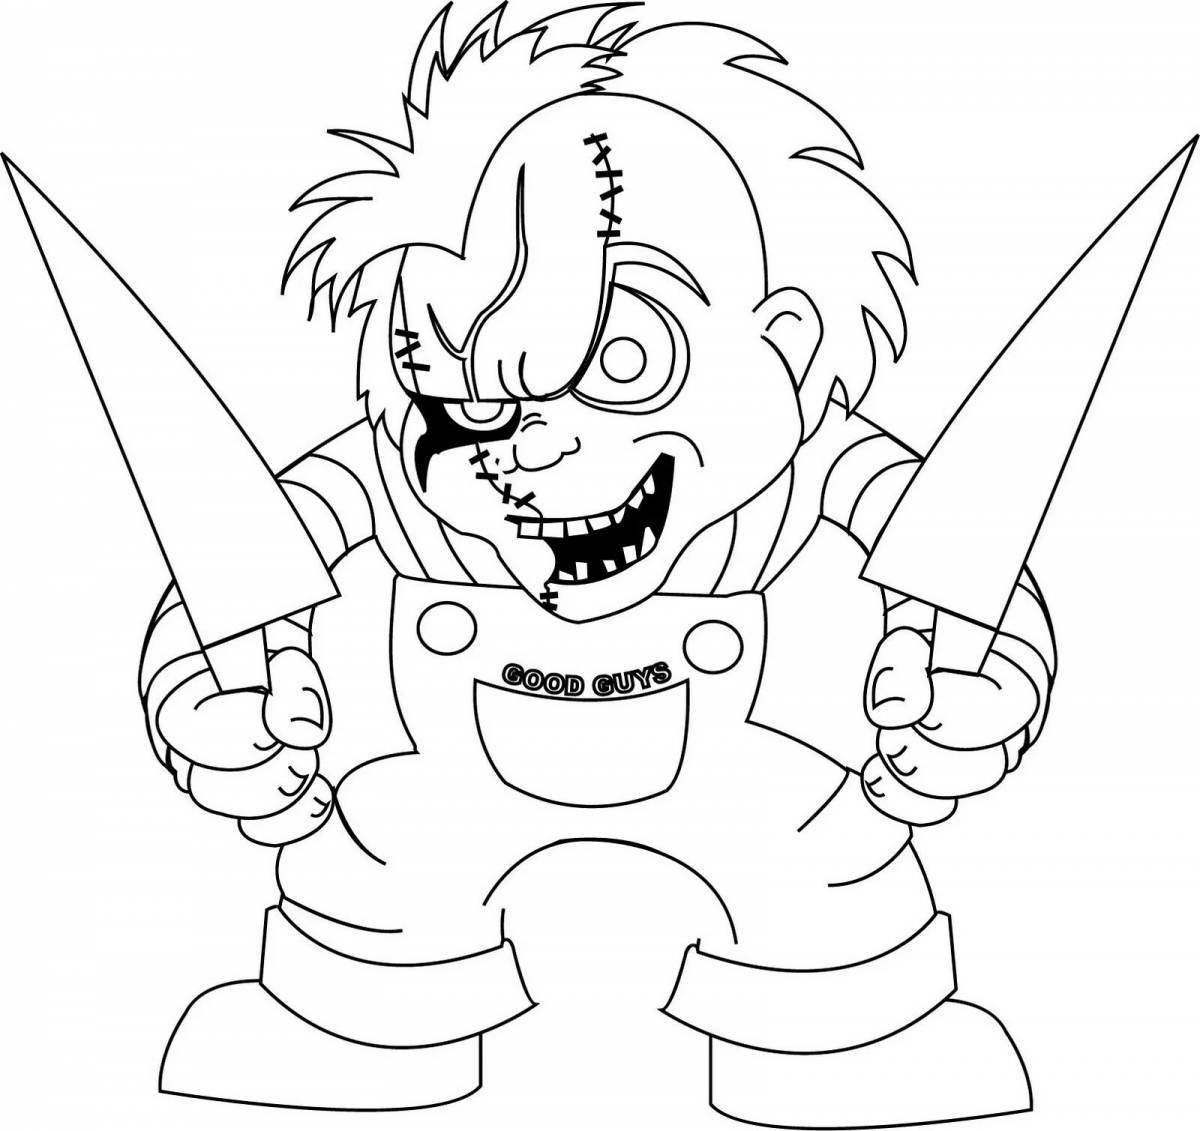 Colouring chucky - chilling blood